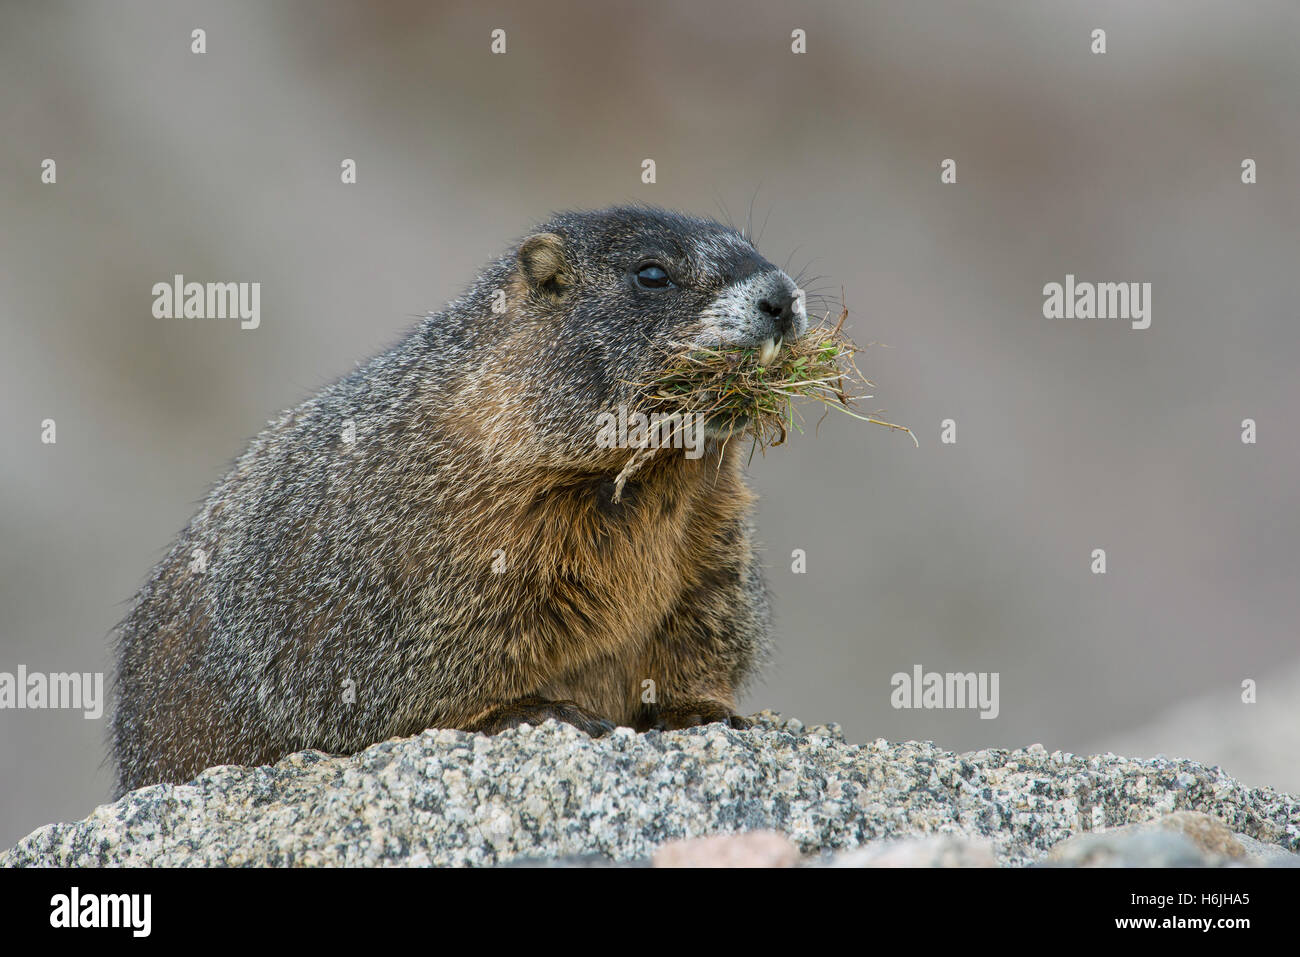 Yellow-bellied Marmot (Marmota flaviventris) carrying nesting material, Mt Evans, Wilderness area, Rocky Mountains, W USA Stock Photo